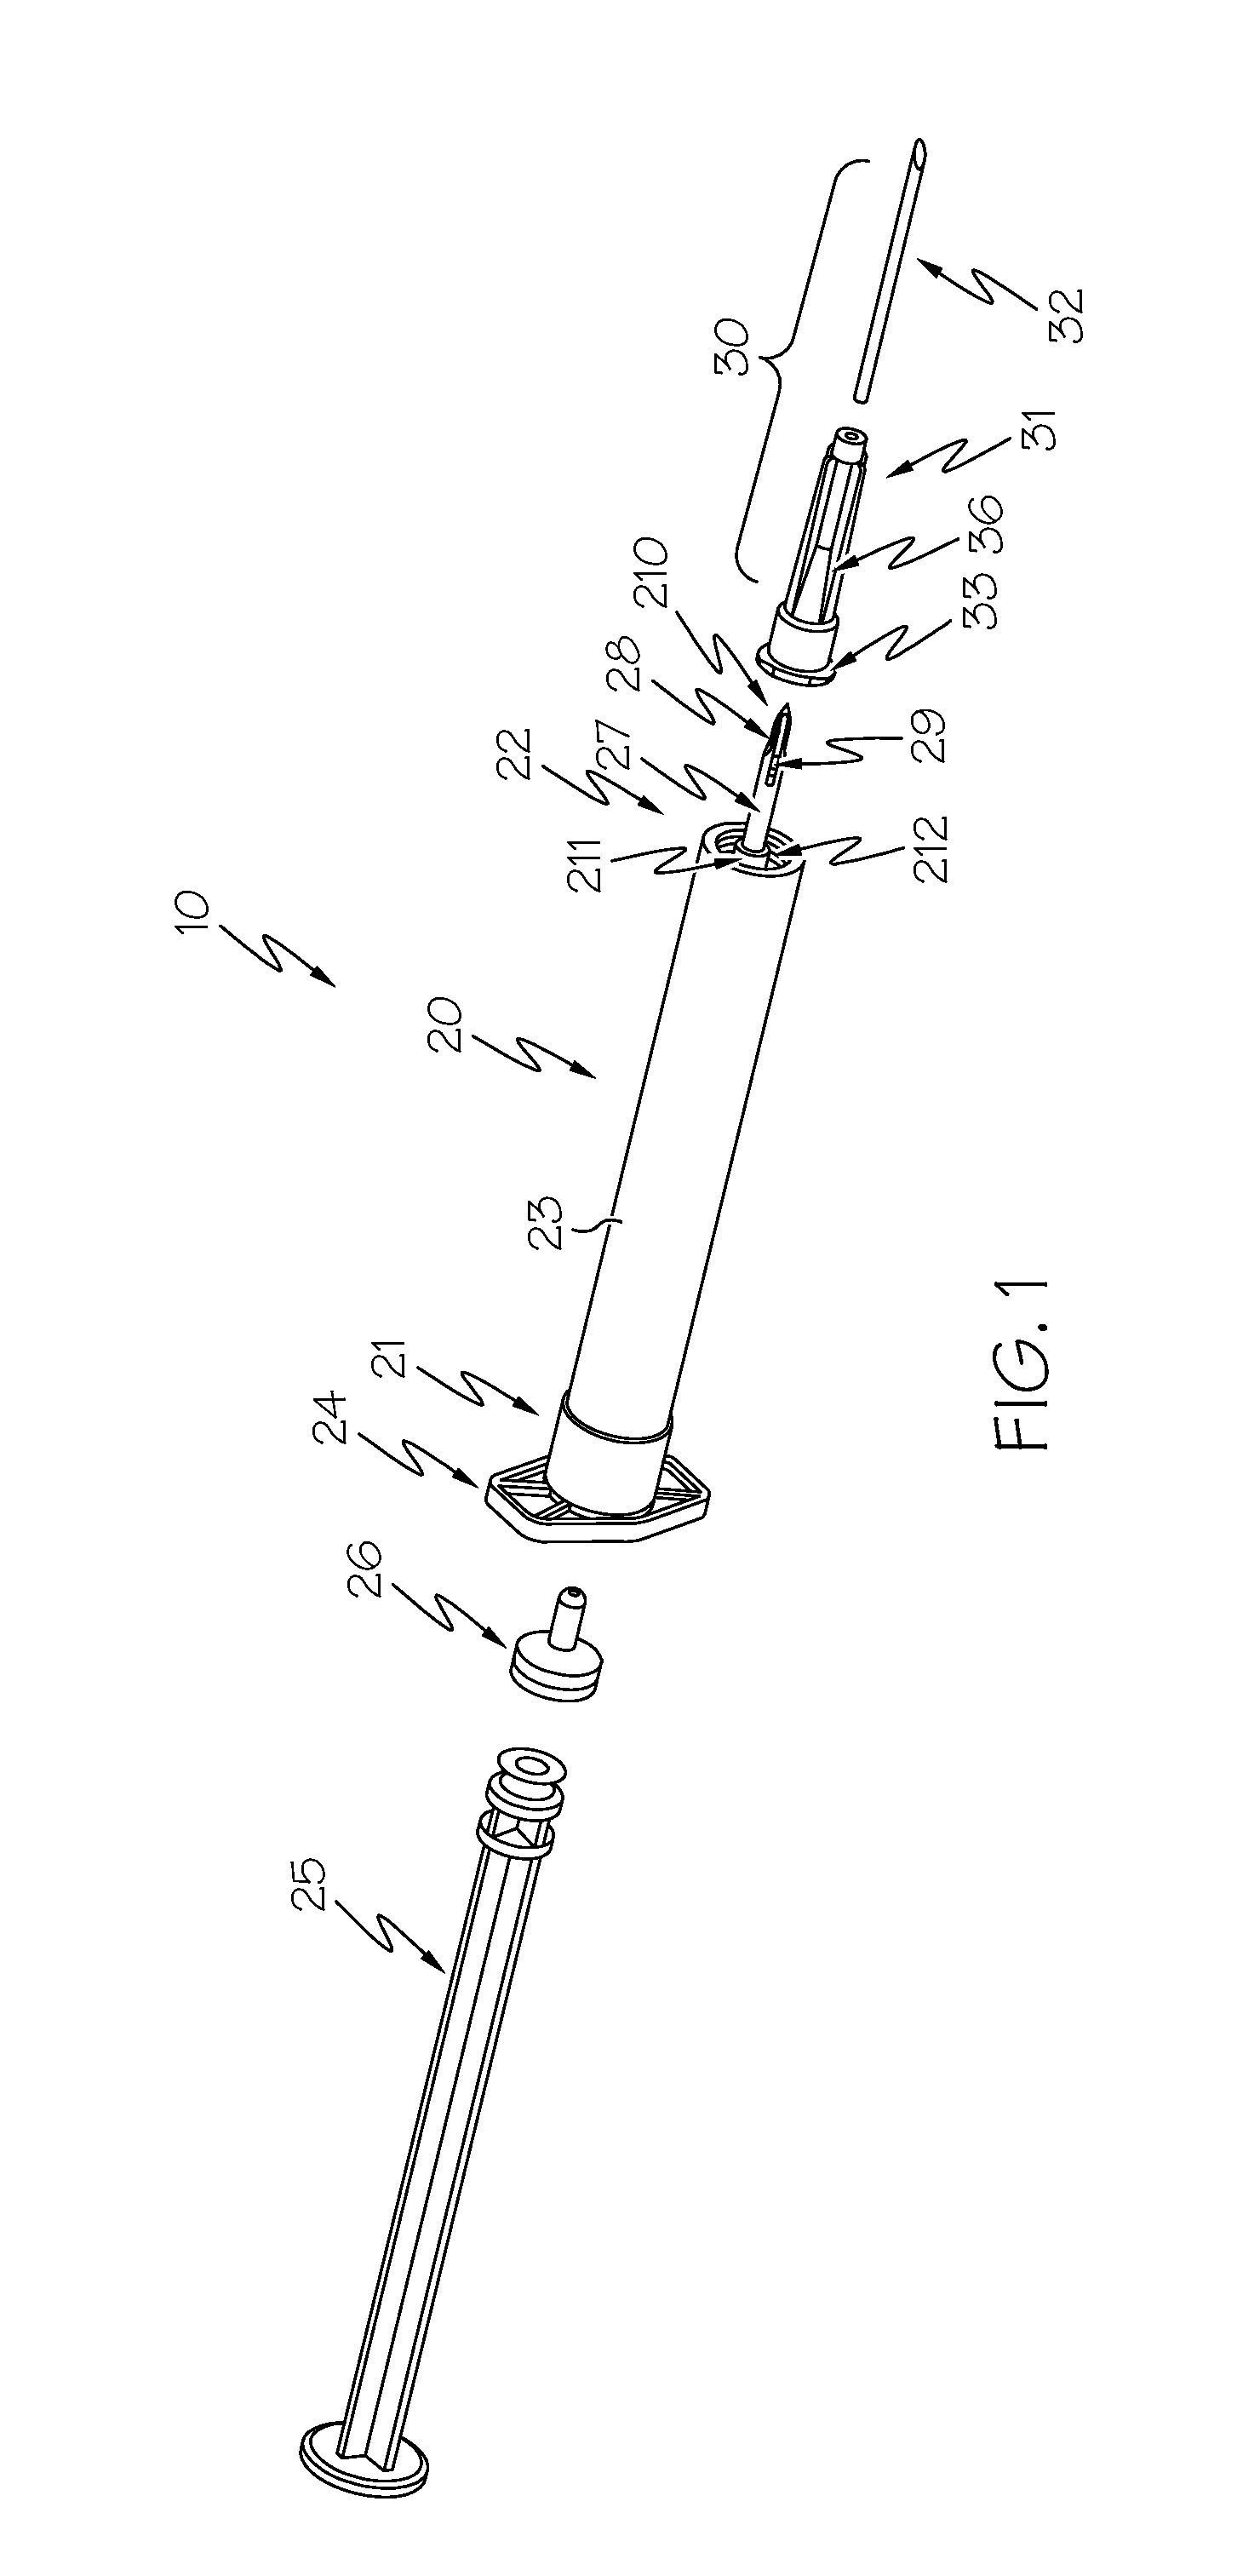 Syringe with integrated cannula